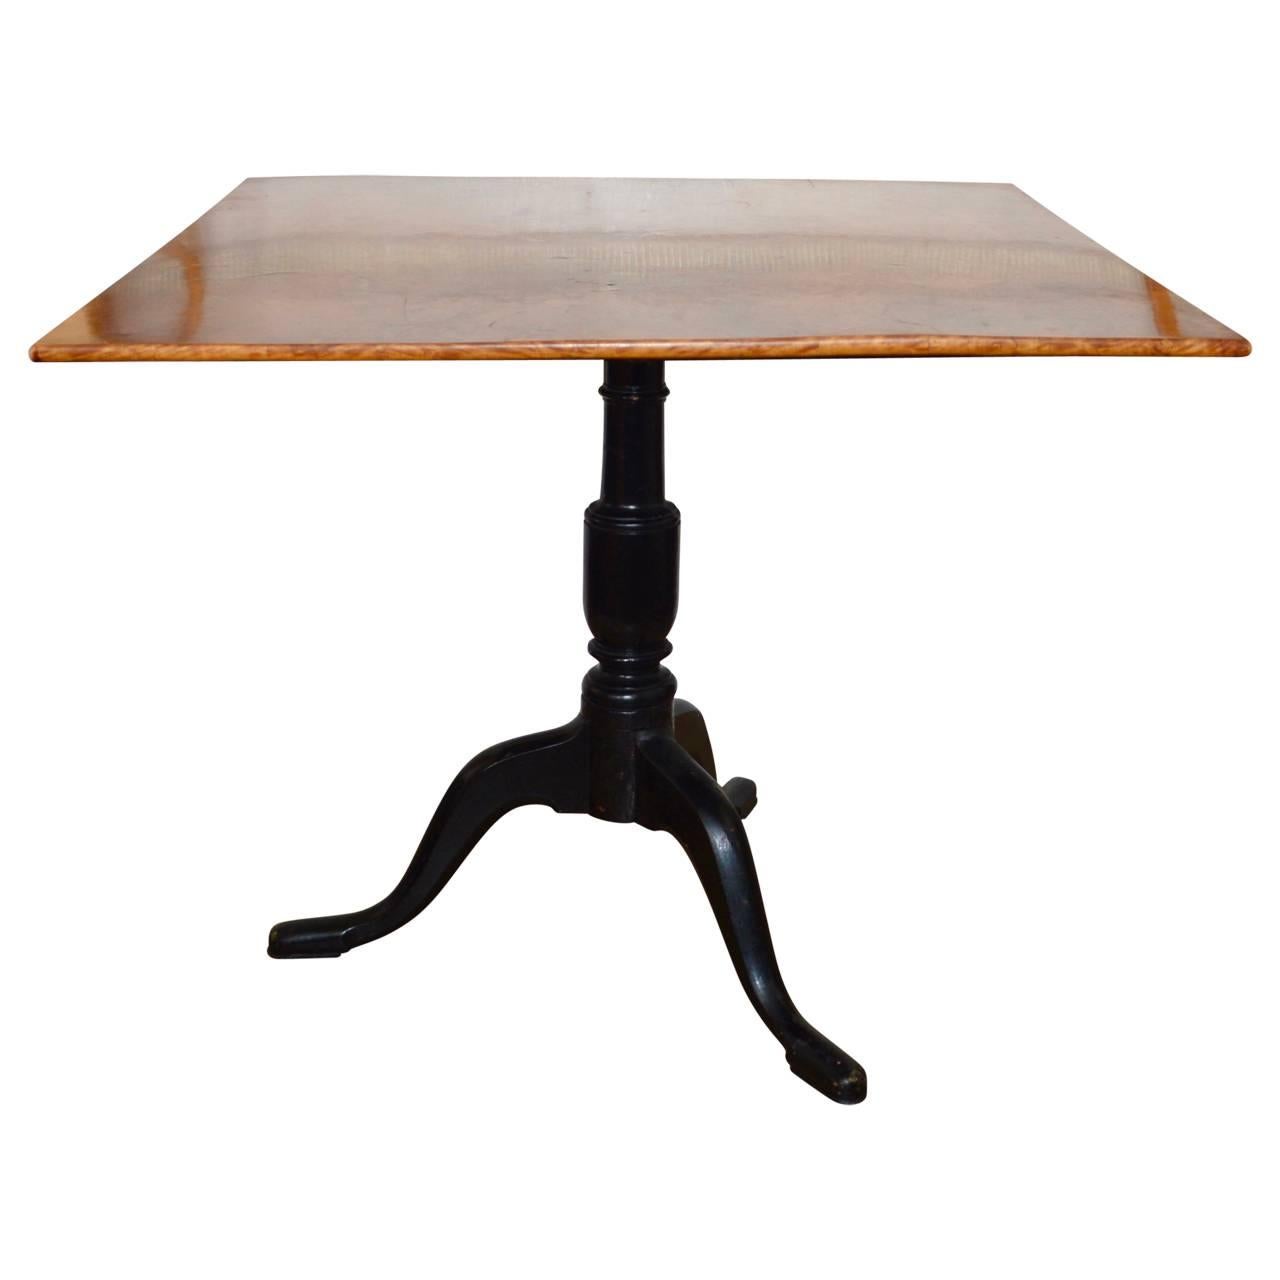 Beautiful Burl-wood lip top table from Sweden.